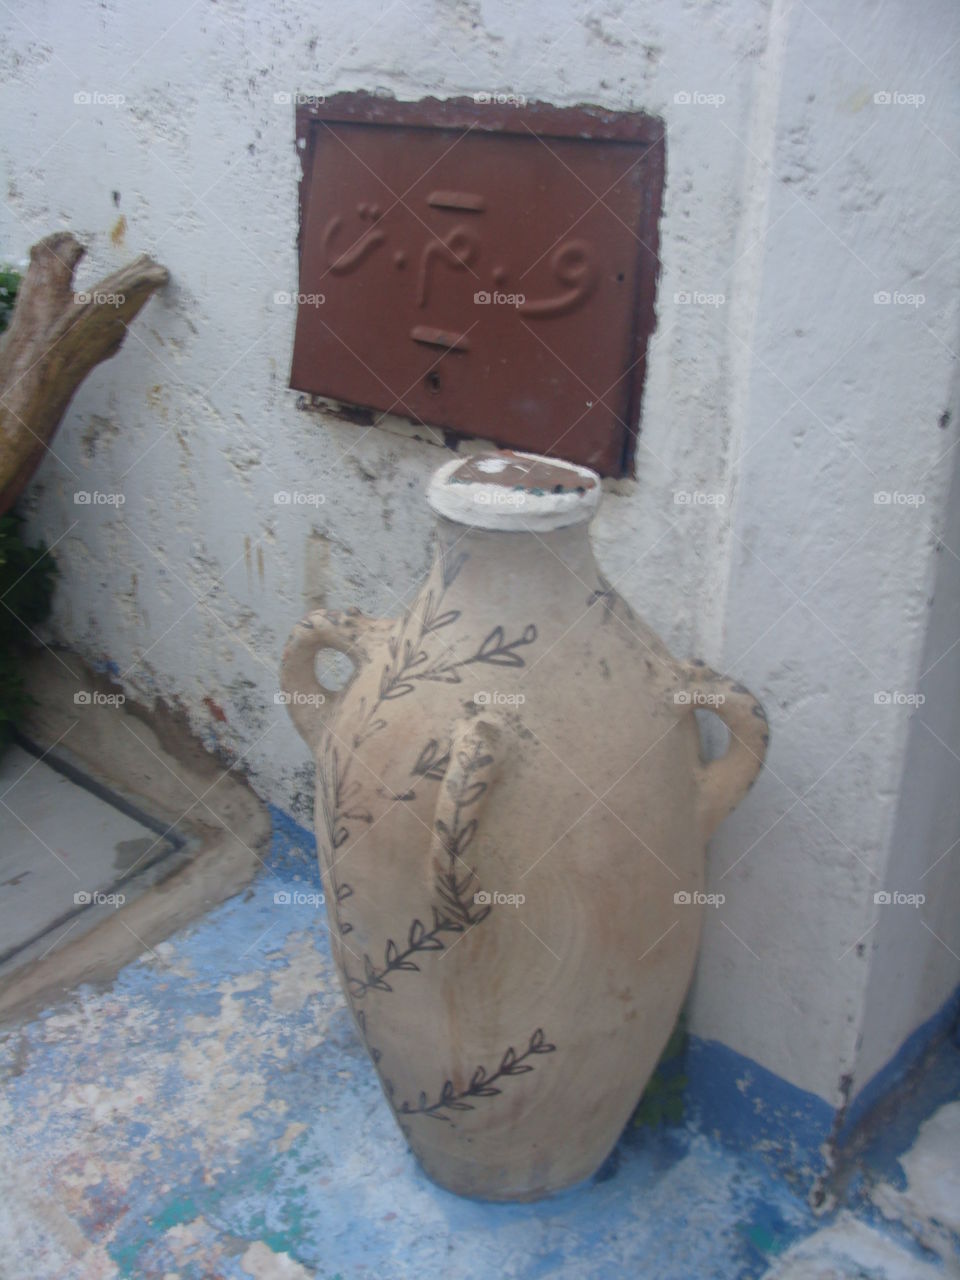 No Person, Pottery, Art, Old, Antique